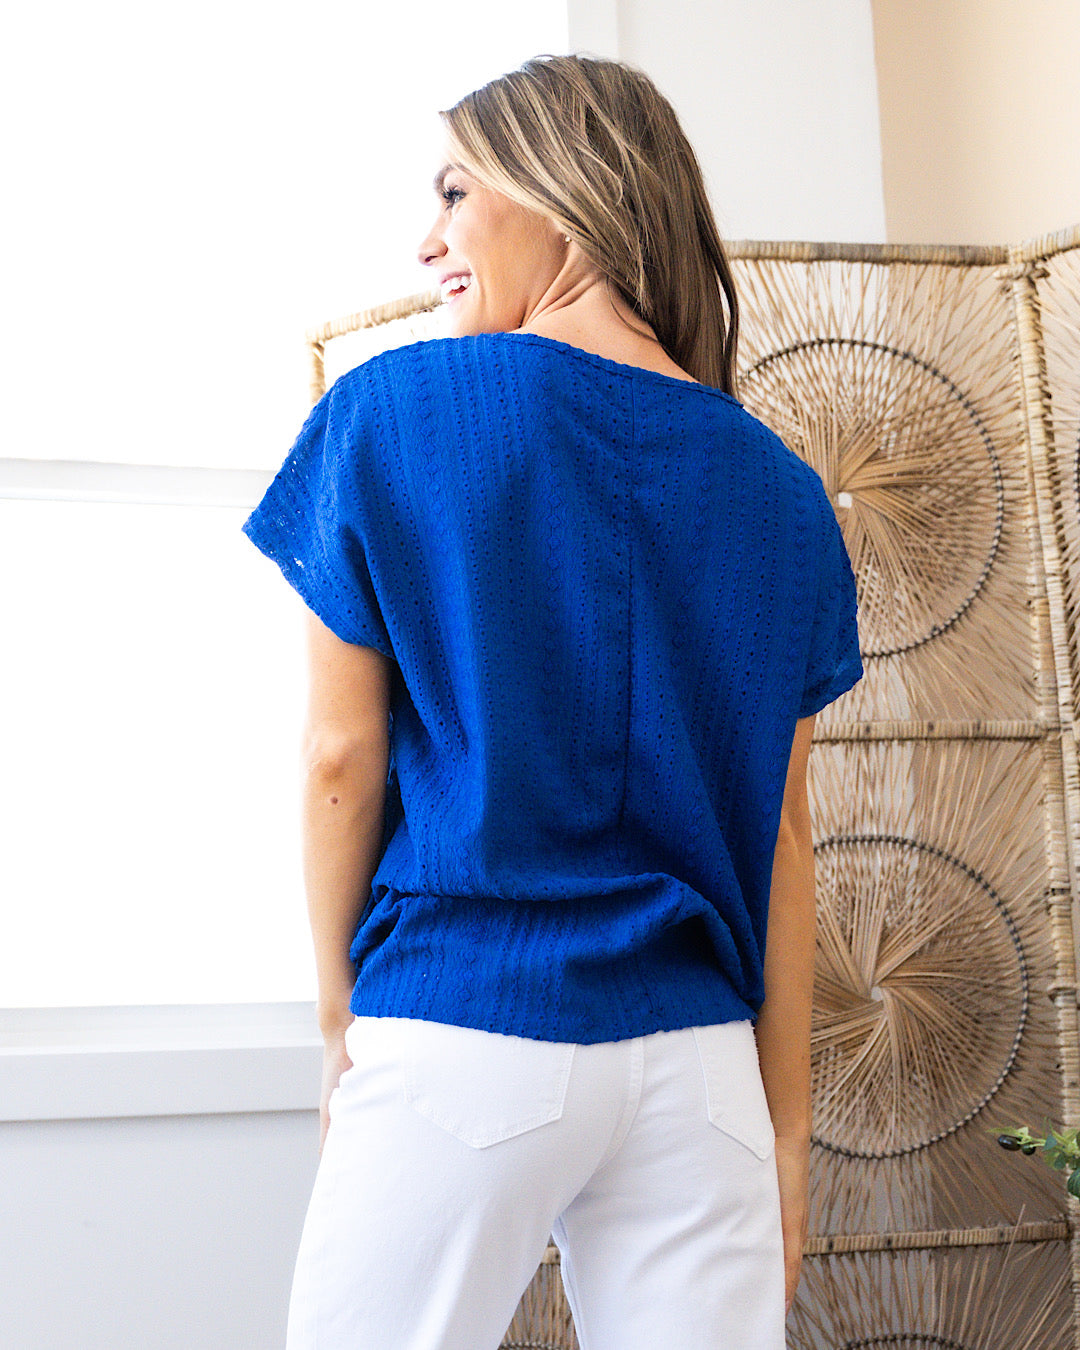 NEW! Trixie Royal Blue Textured V Neck Top  Sew In Love   